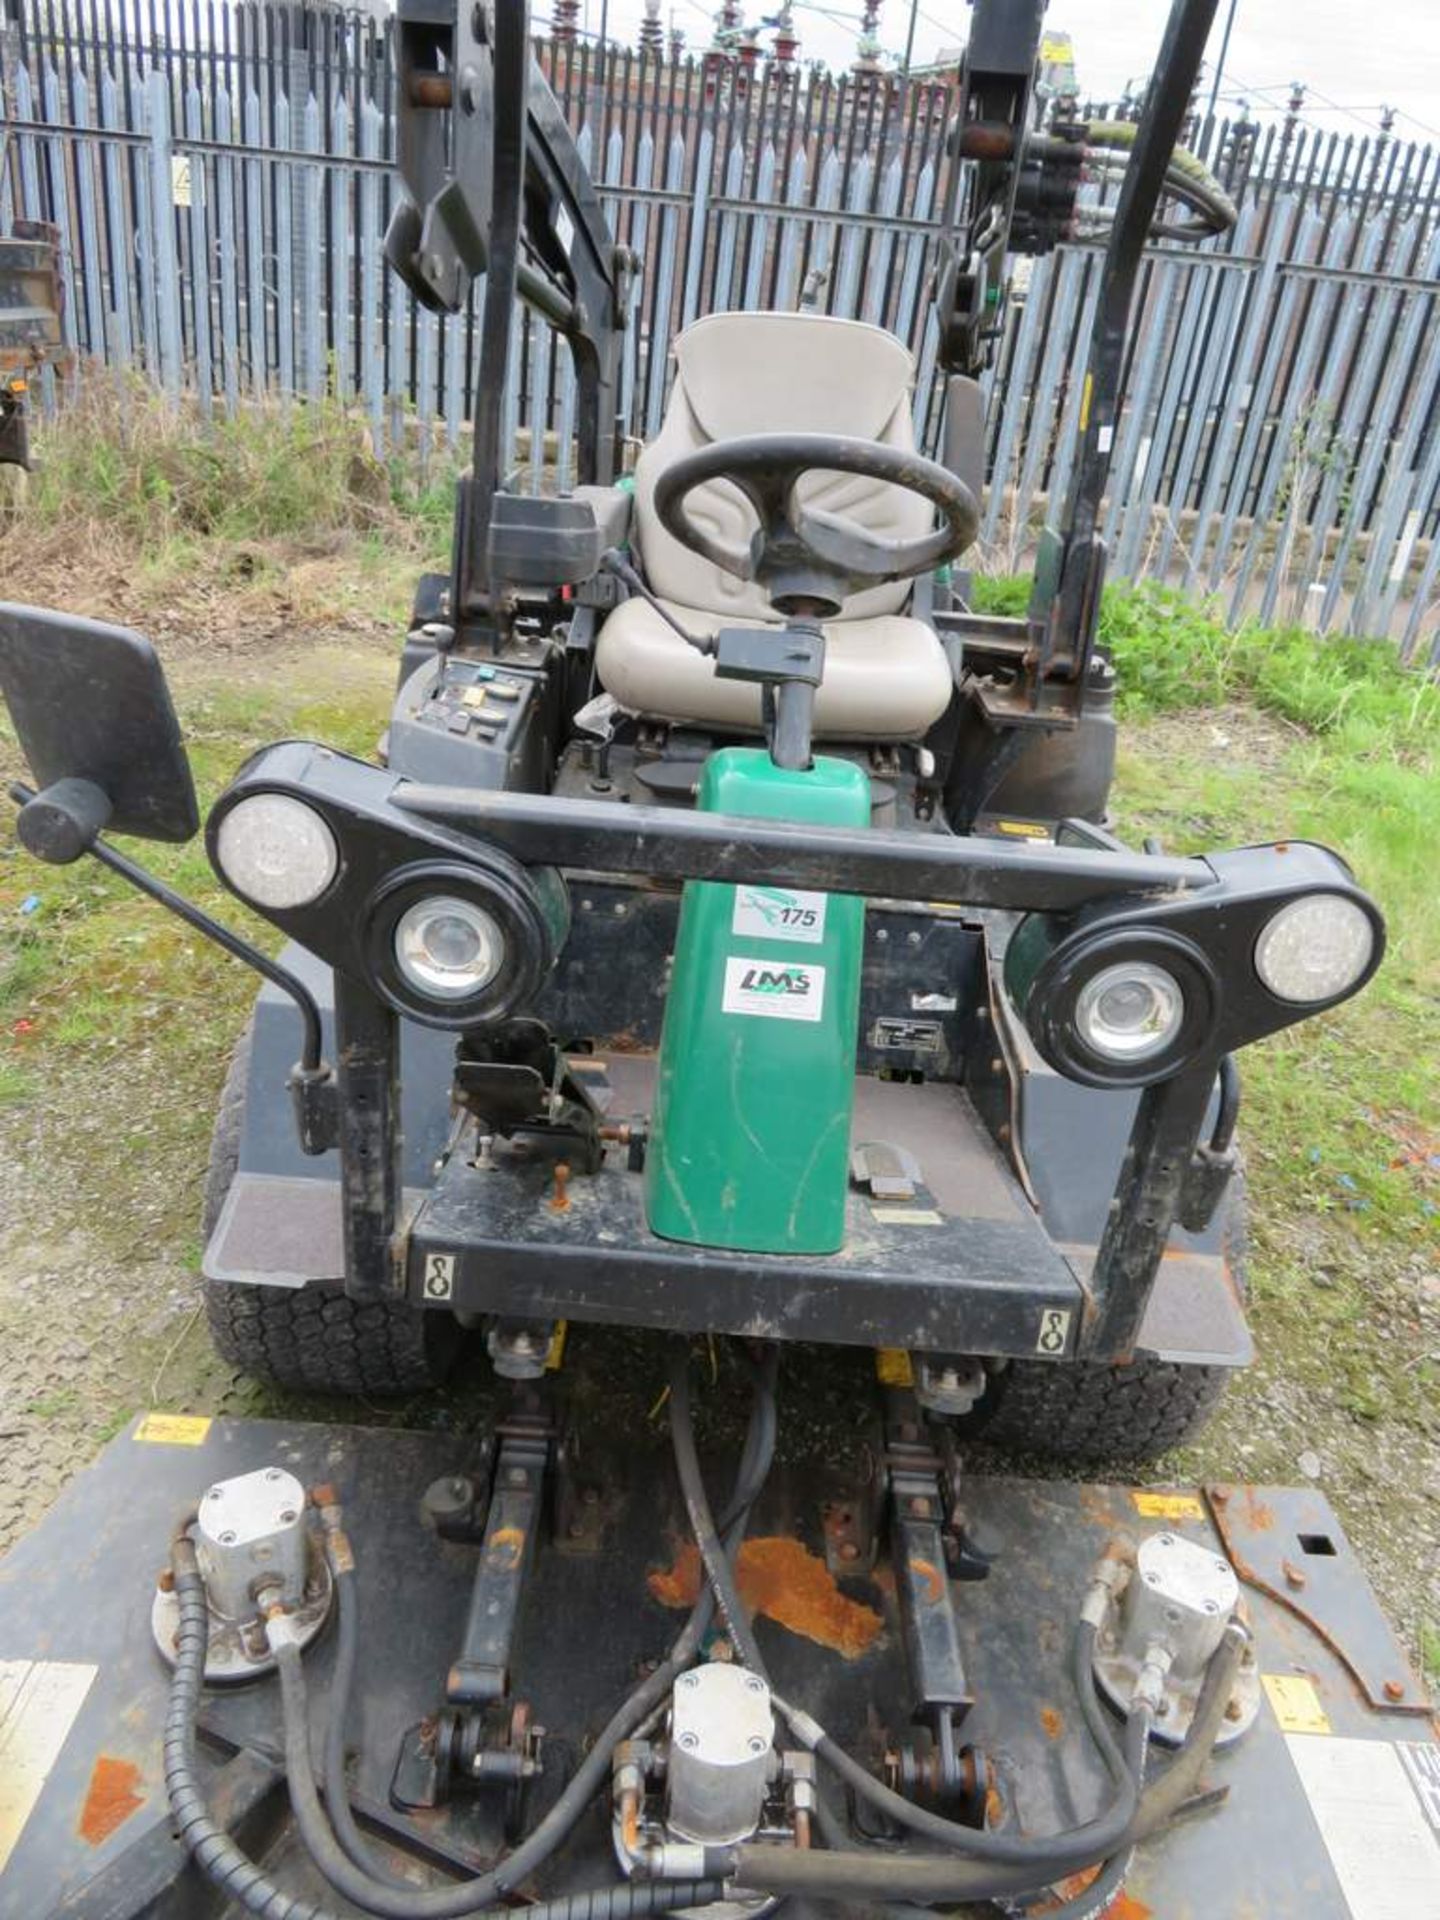 2009 Ransomes HR 3300T Out Front Cutting Deck Mower - FX09 ABF - Image 4 of 16